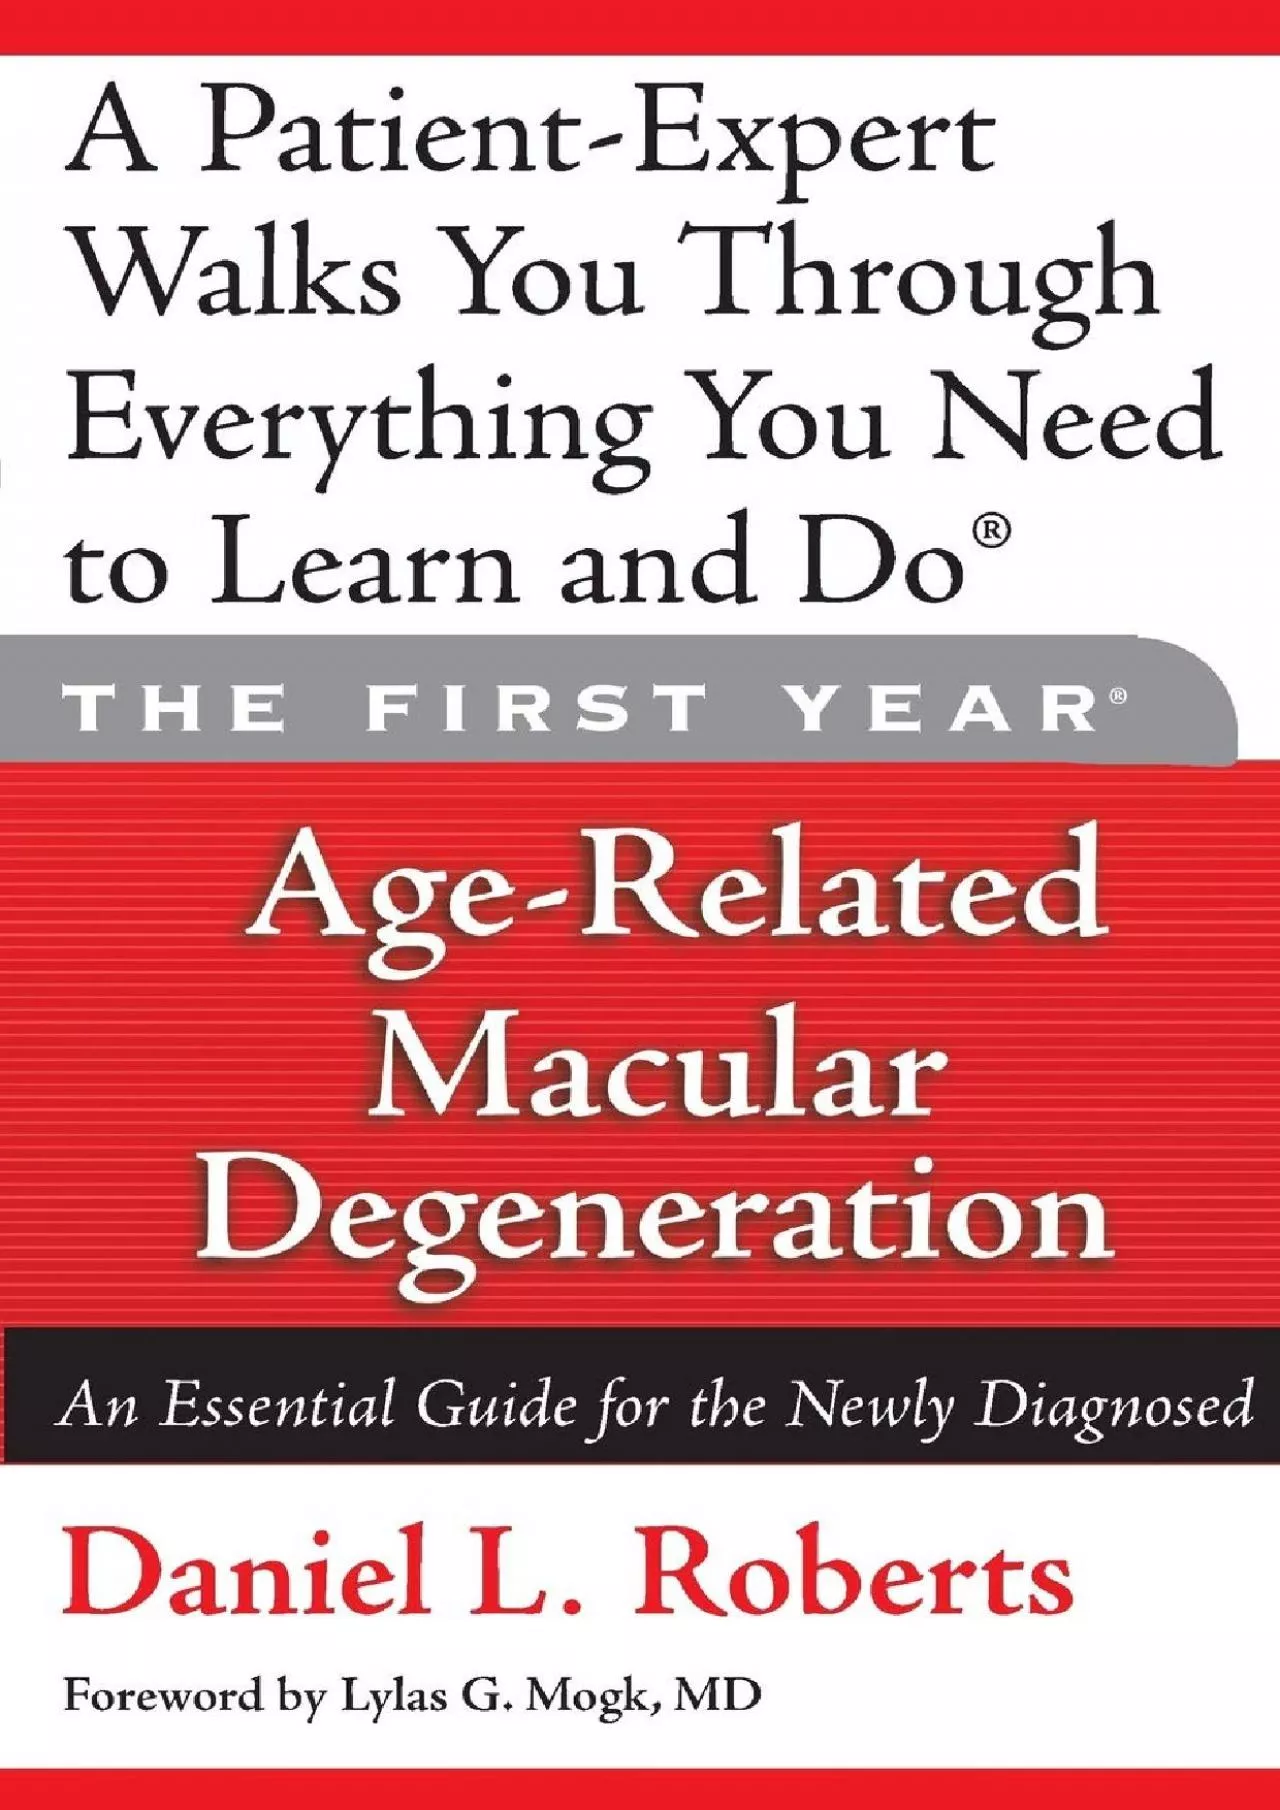 (BOOK)-The First Year: Age-Related Macular Degeneration: An Essential Guide for the Newly